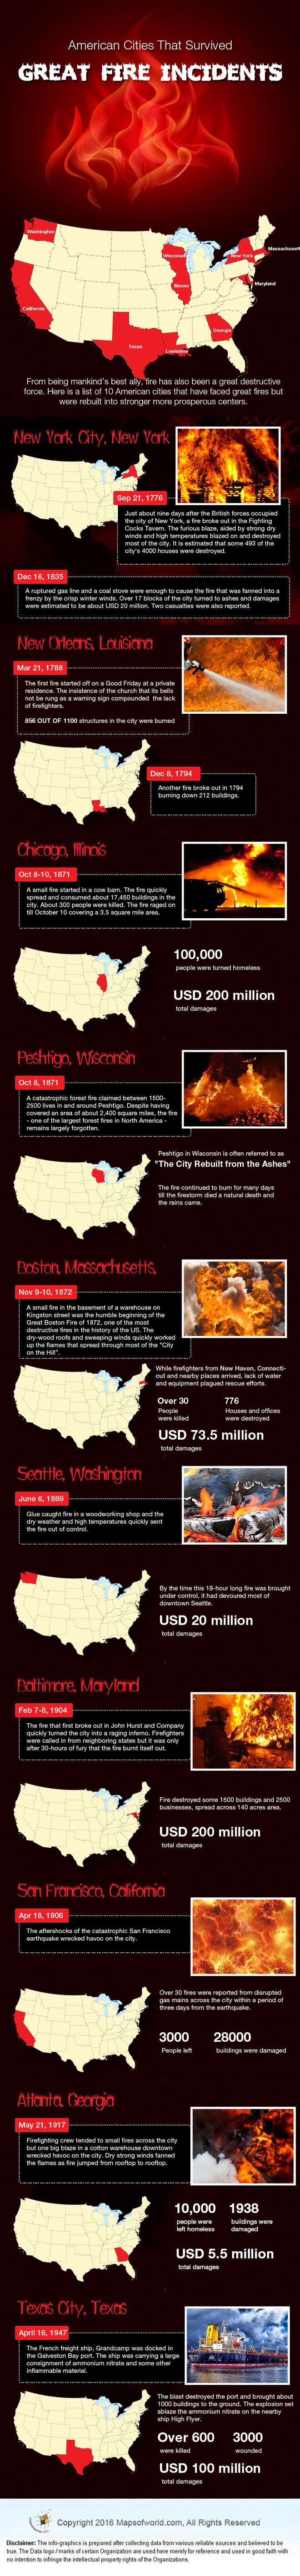 American Cities That Survived Great Fire Incidents Infographic